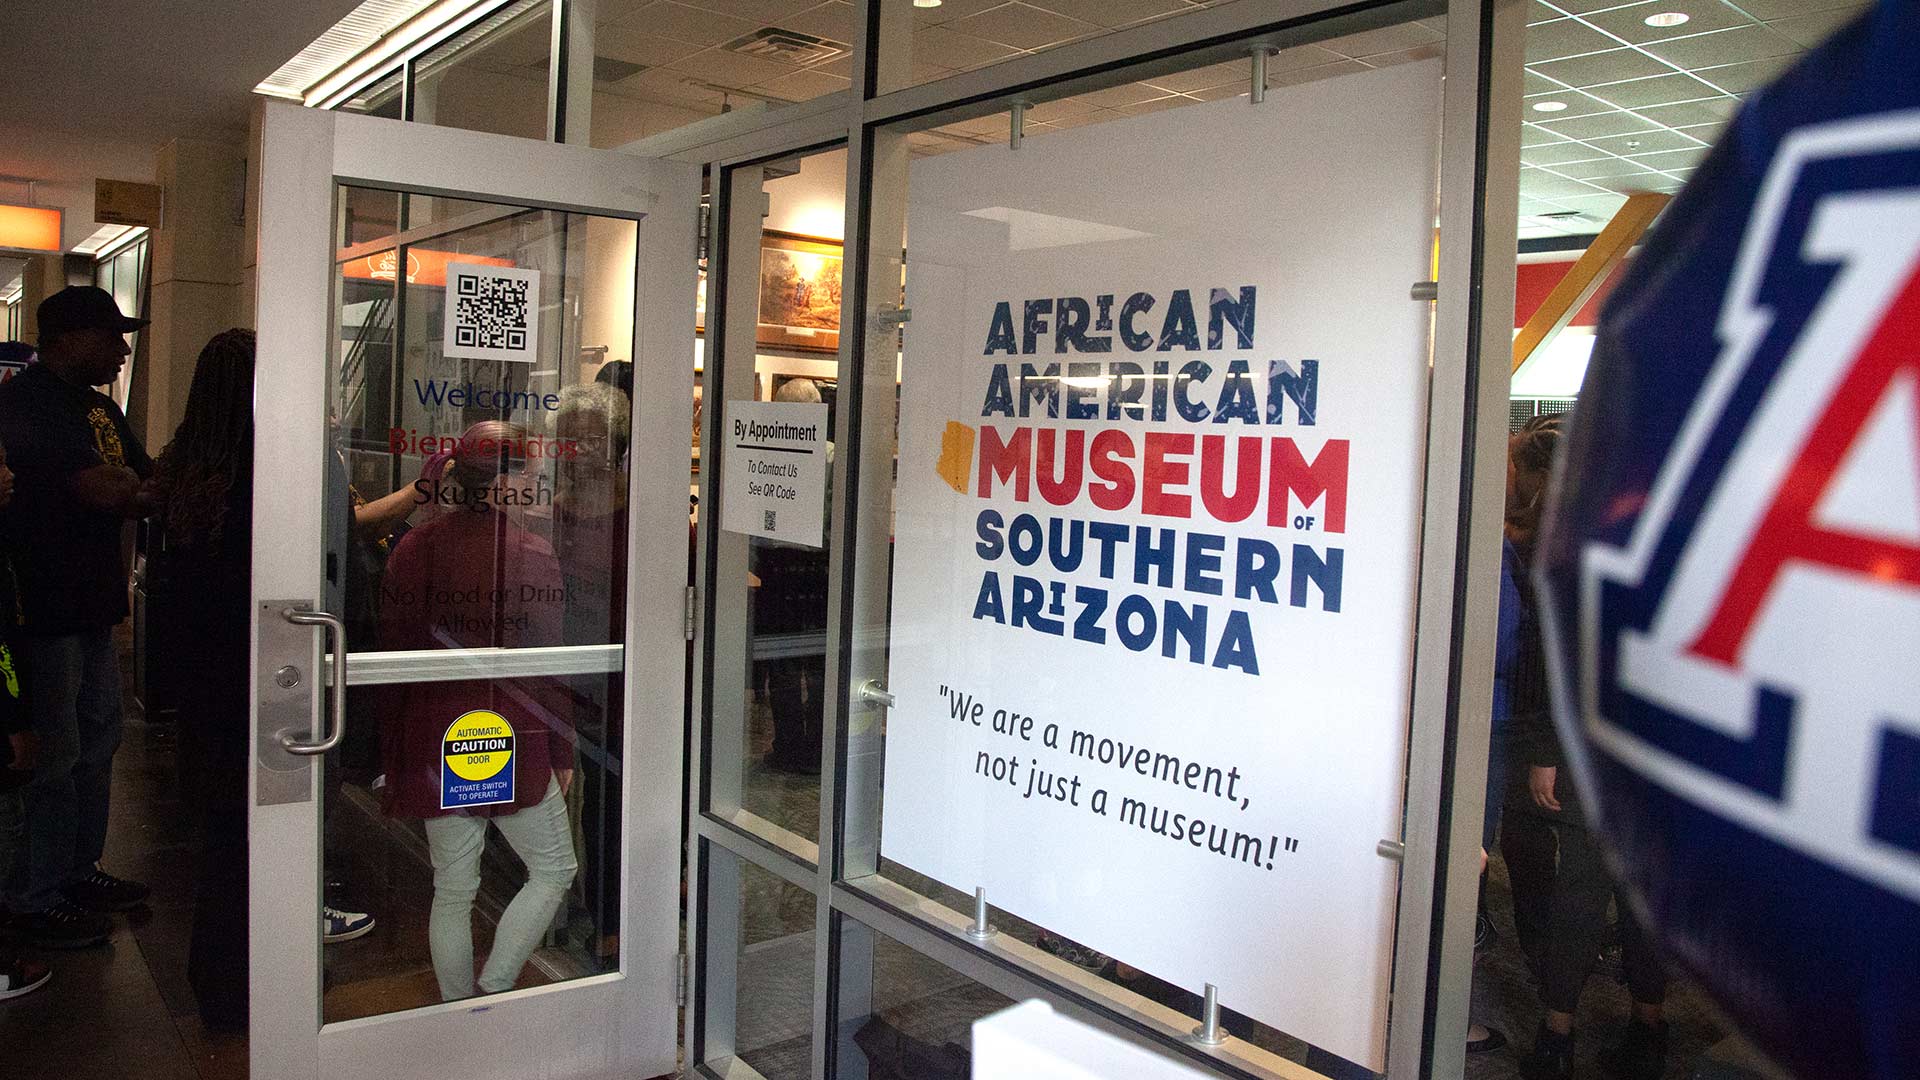 Entrance of the African American Museum of Southern Arizona